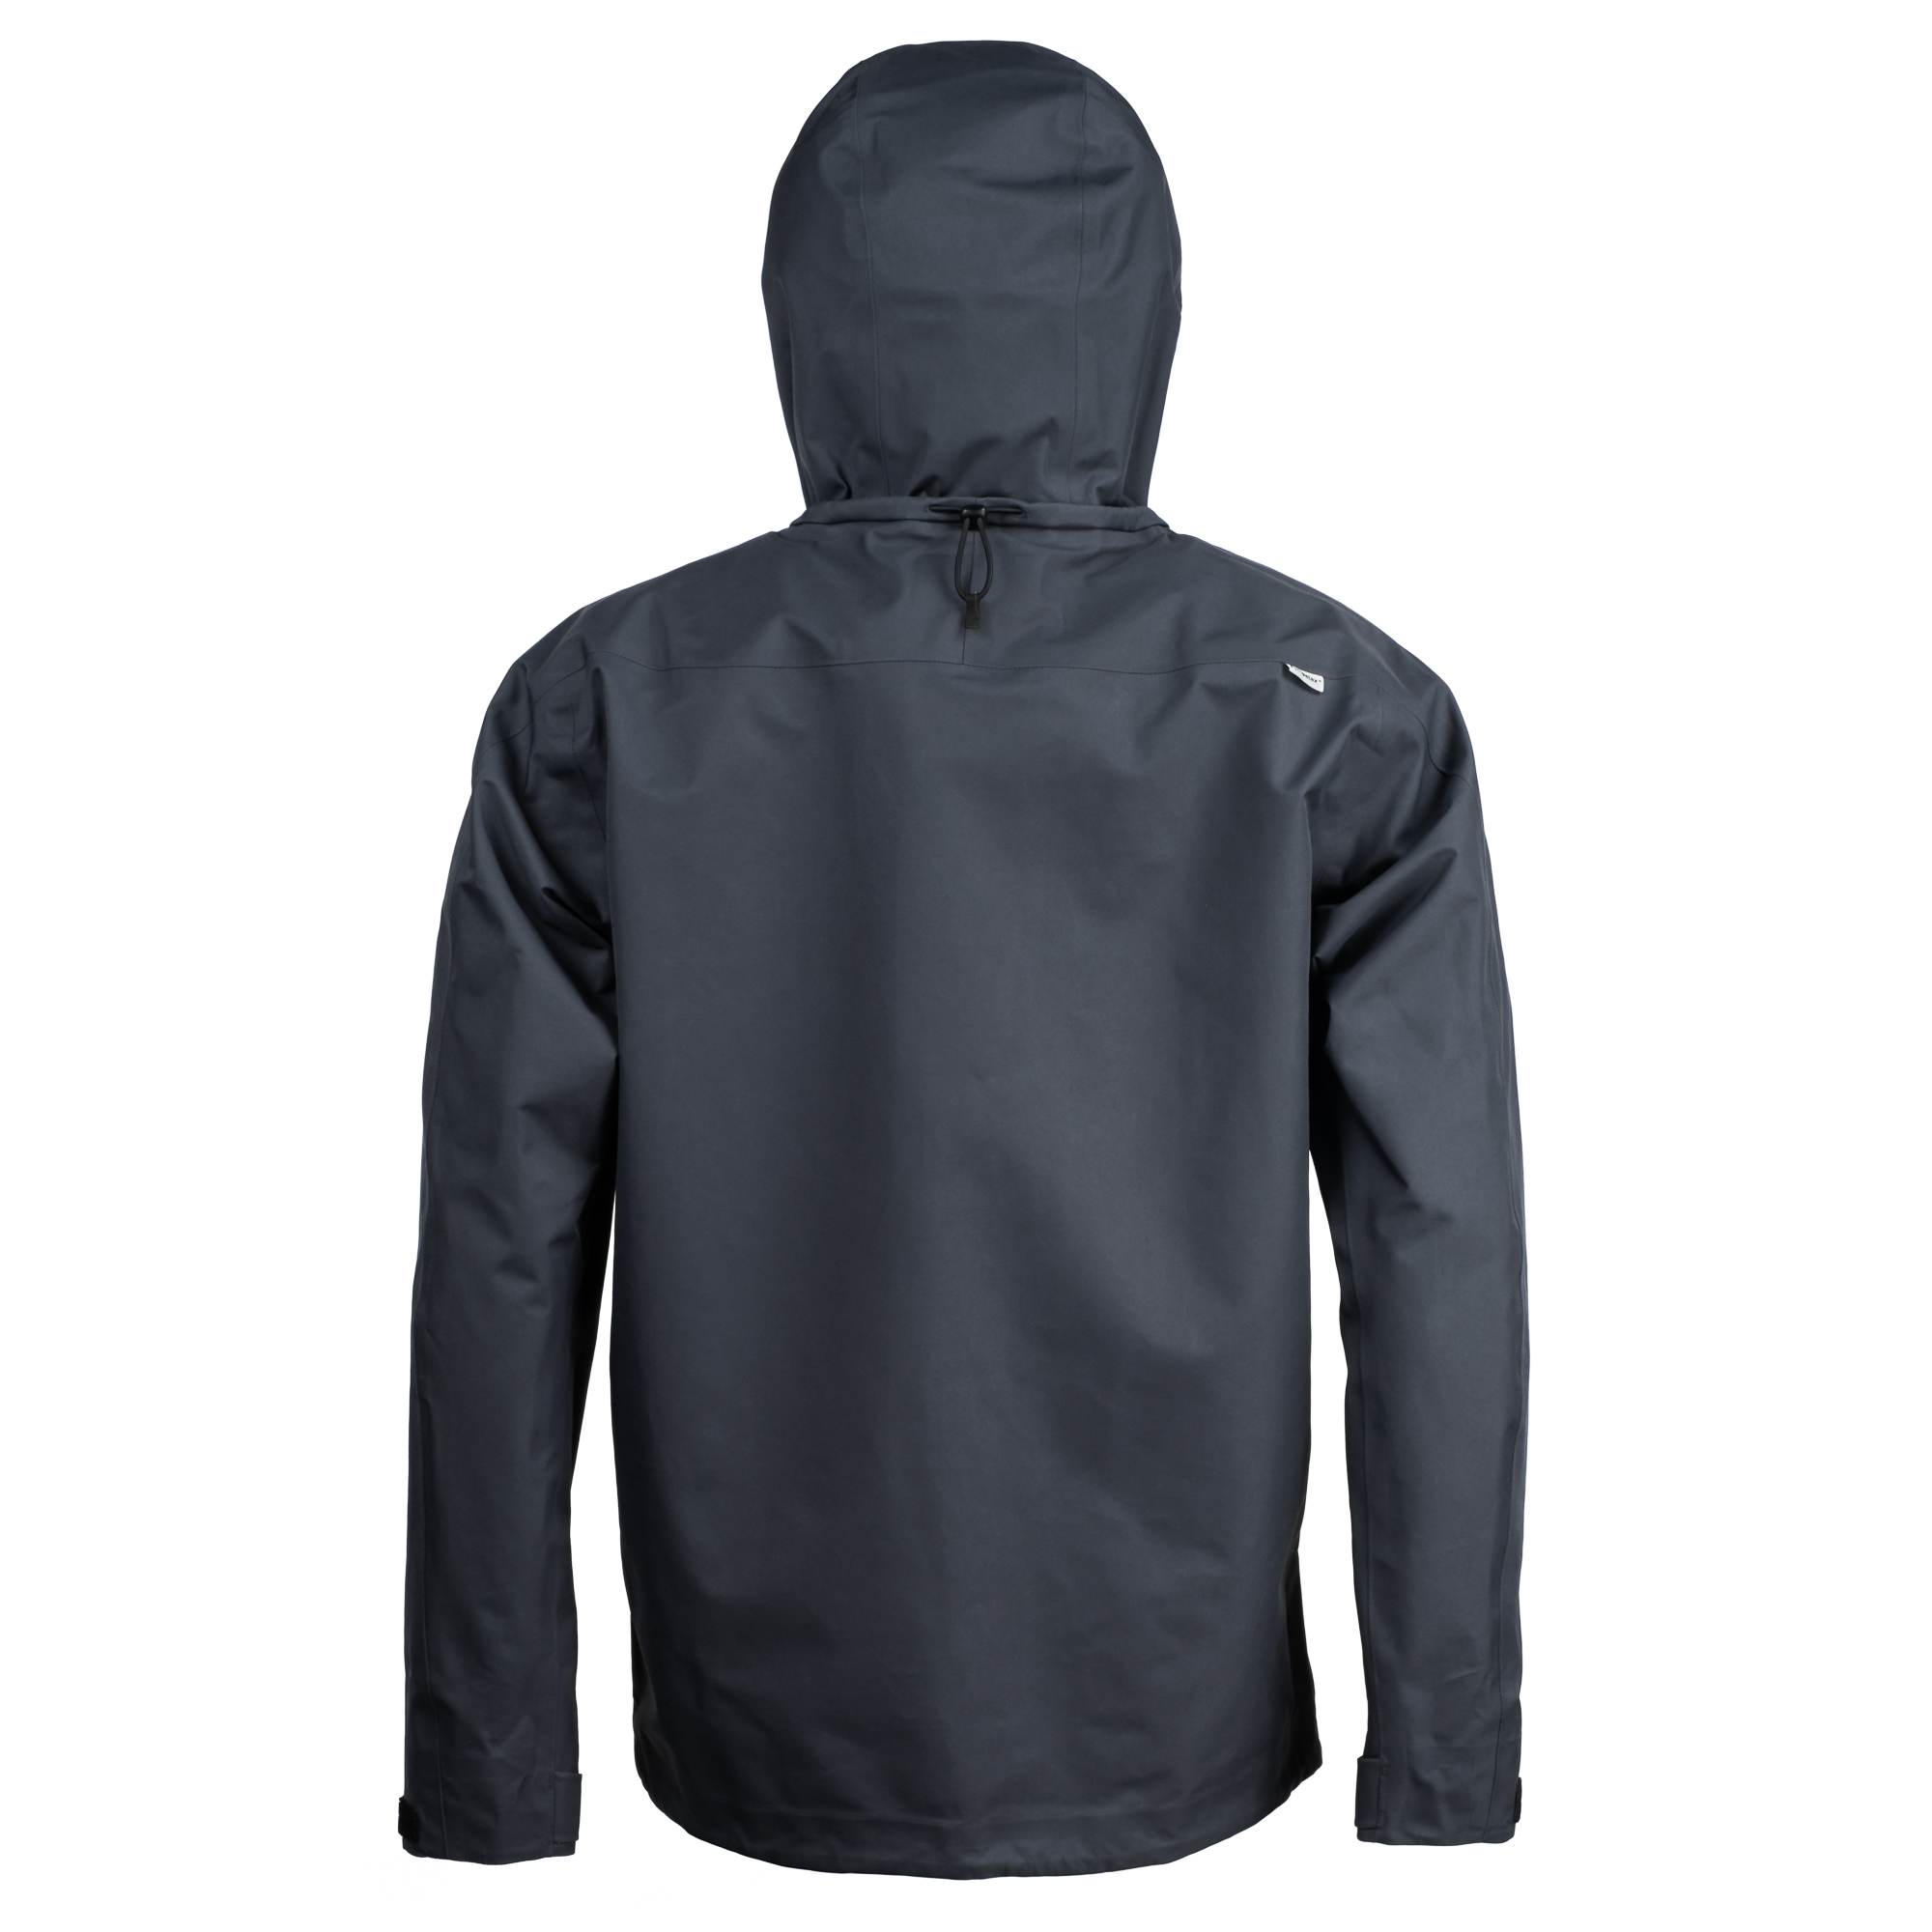 Sierra Softshell Jacket: Lightweight All-Weather Protection